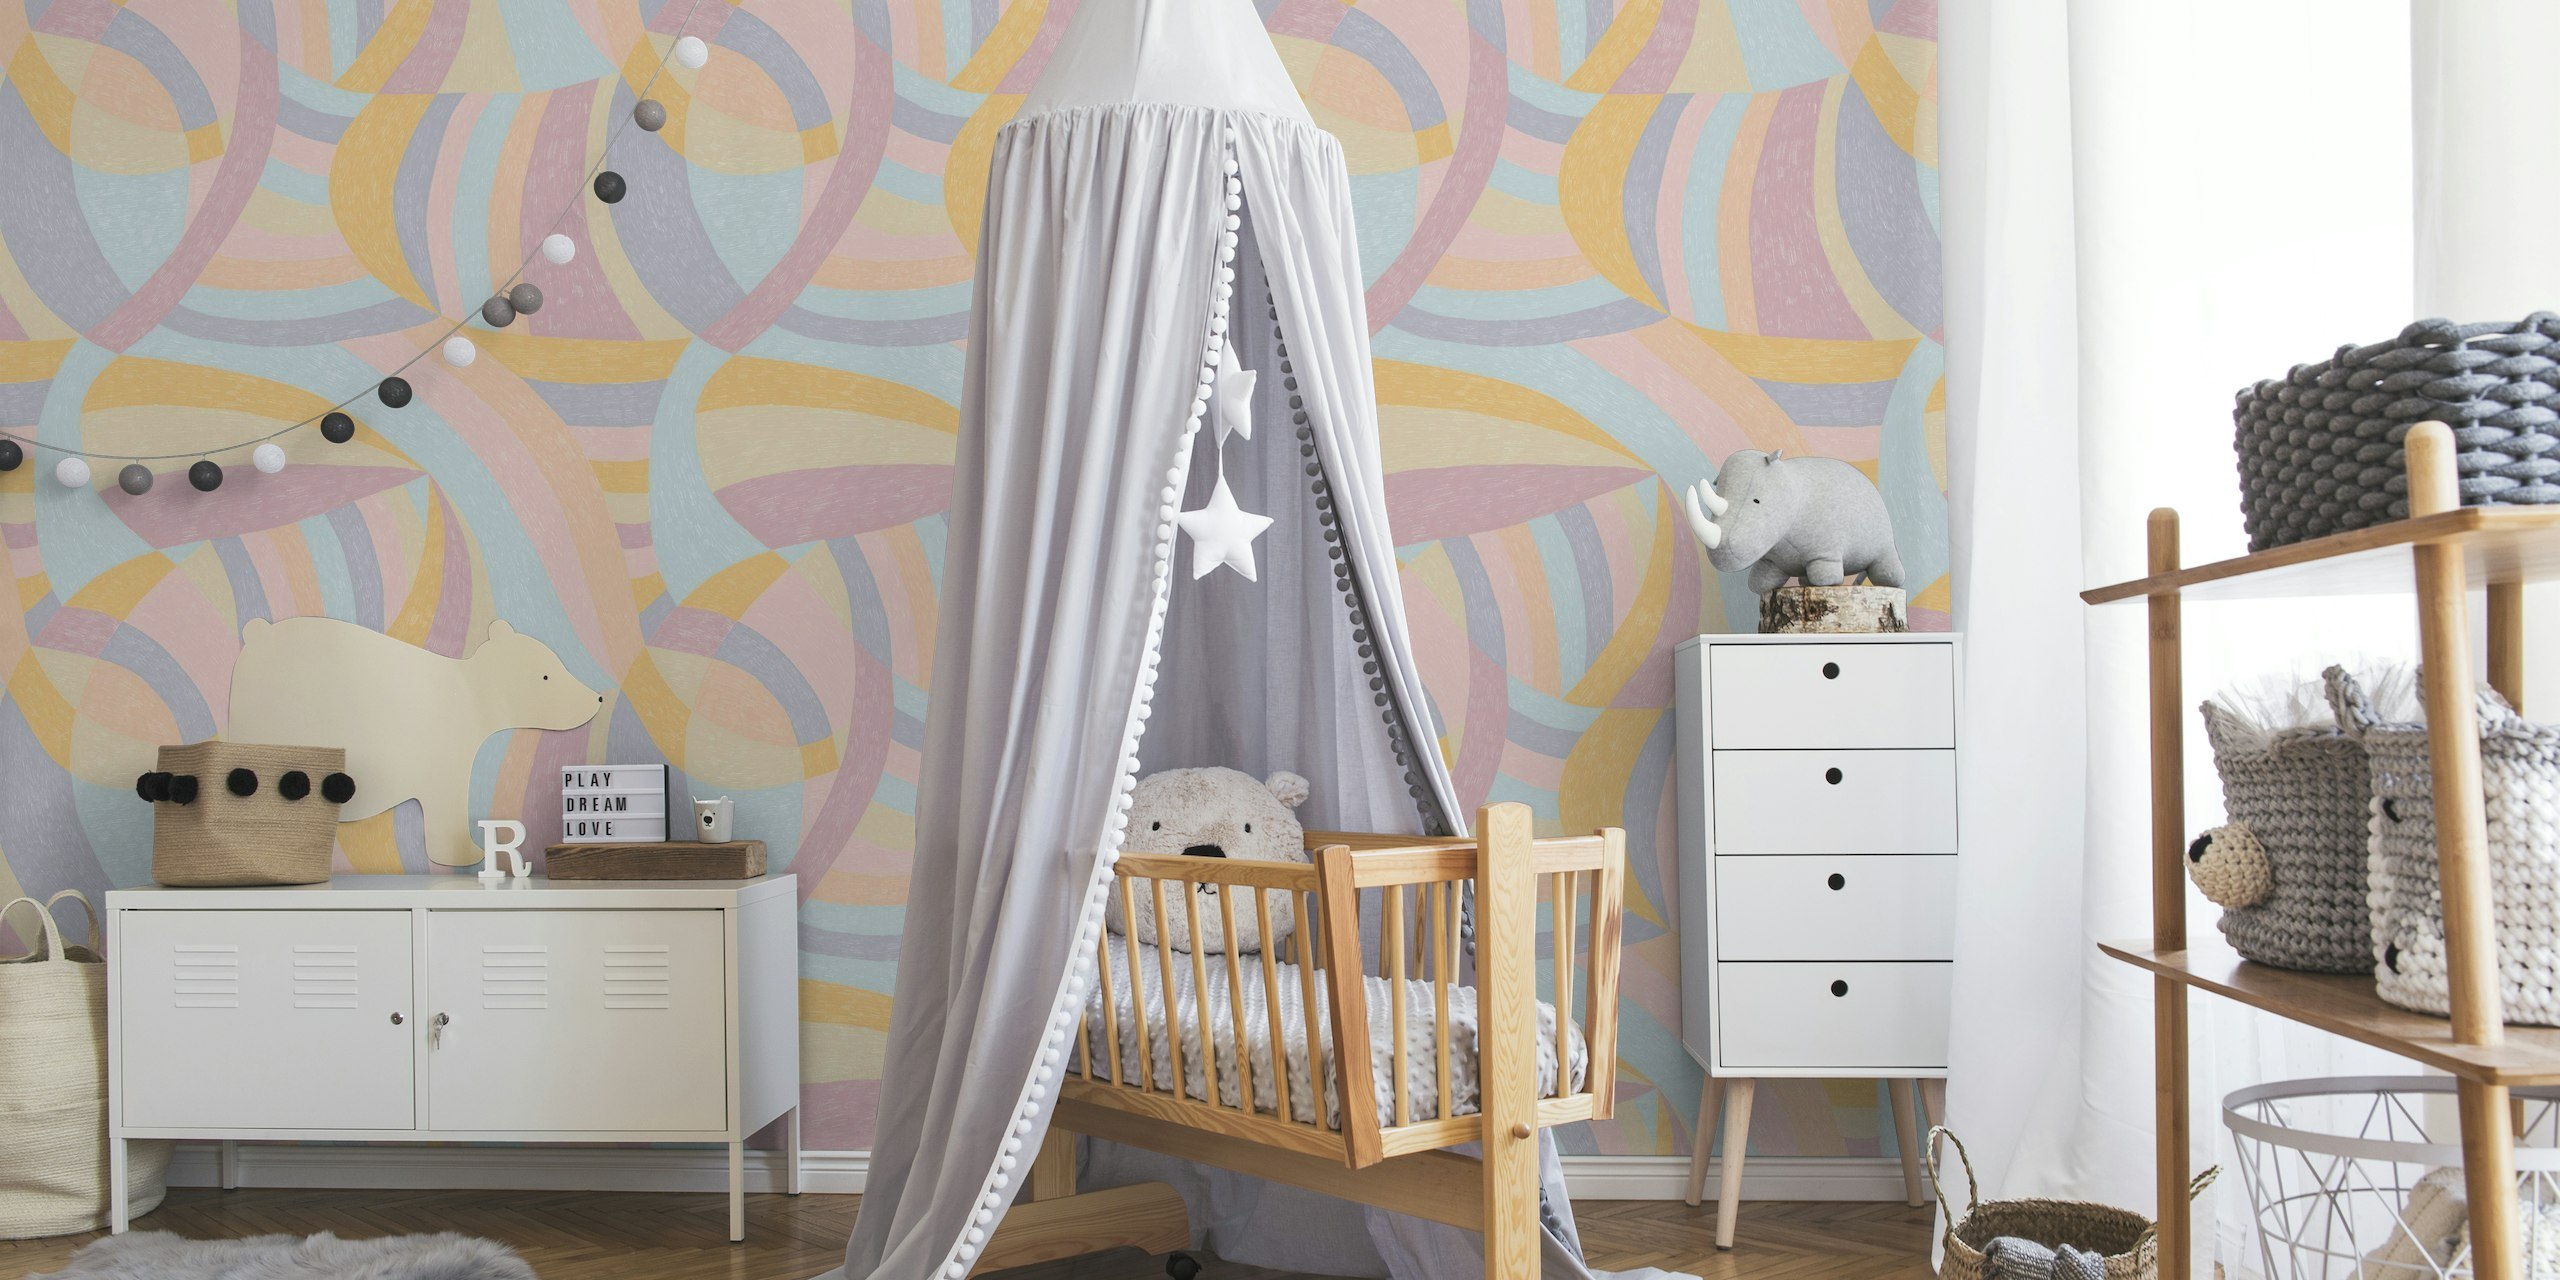 Whimsical Geo Delight - Pastel Play for Kids behang